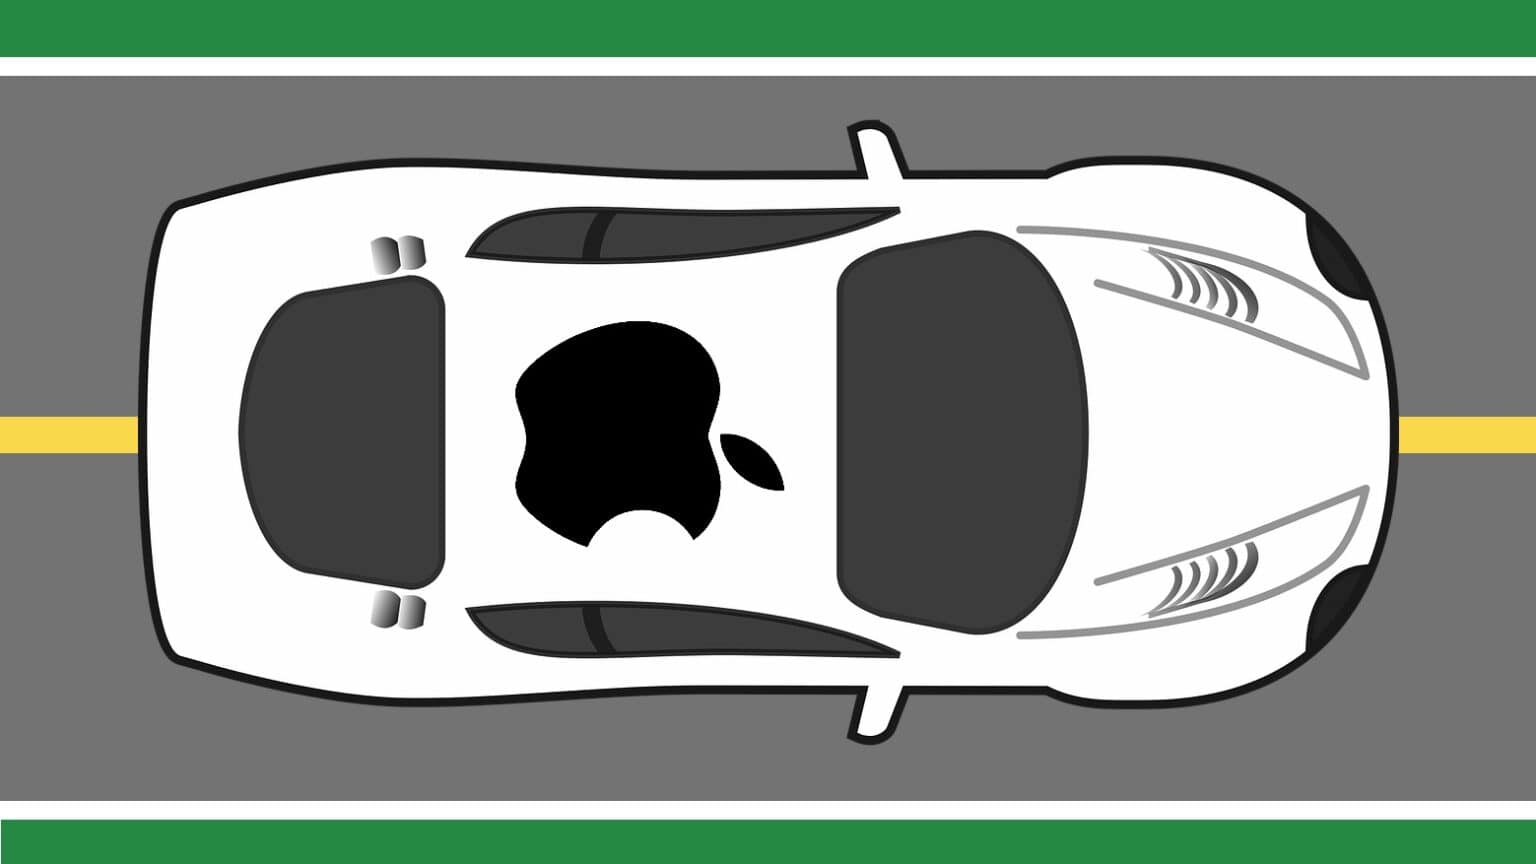 The Apple Car won‘t look anything like this. At all.